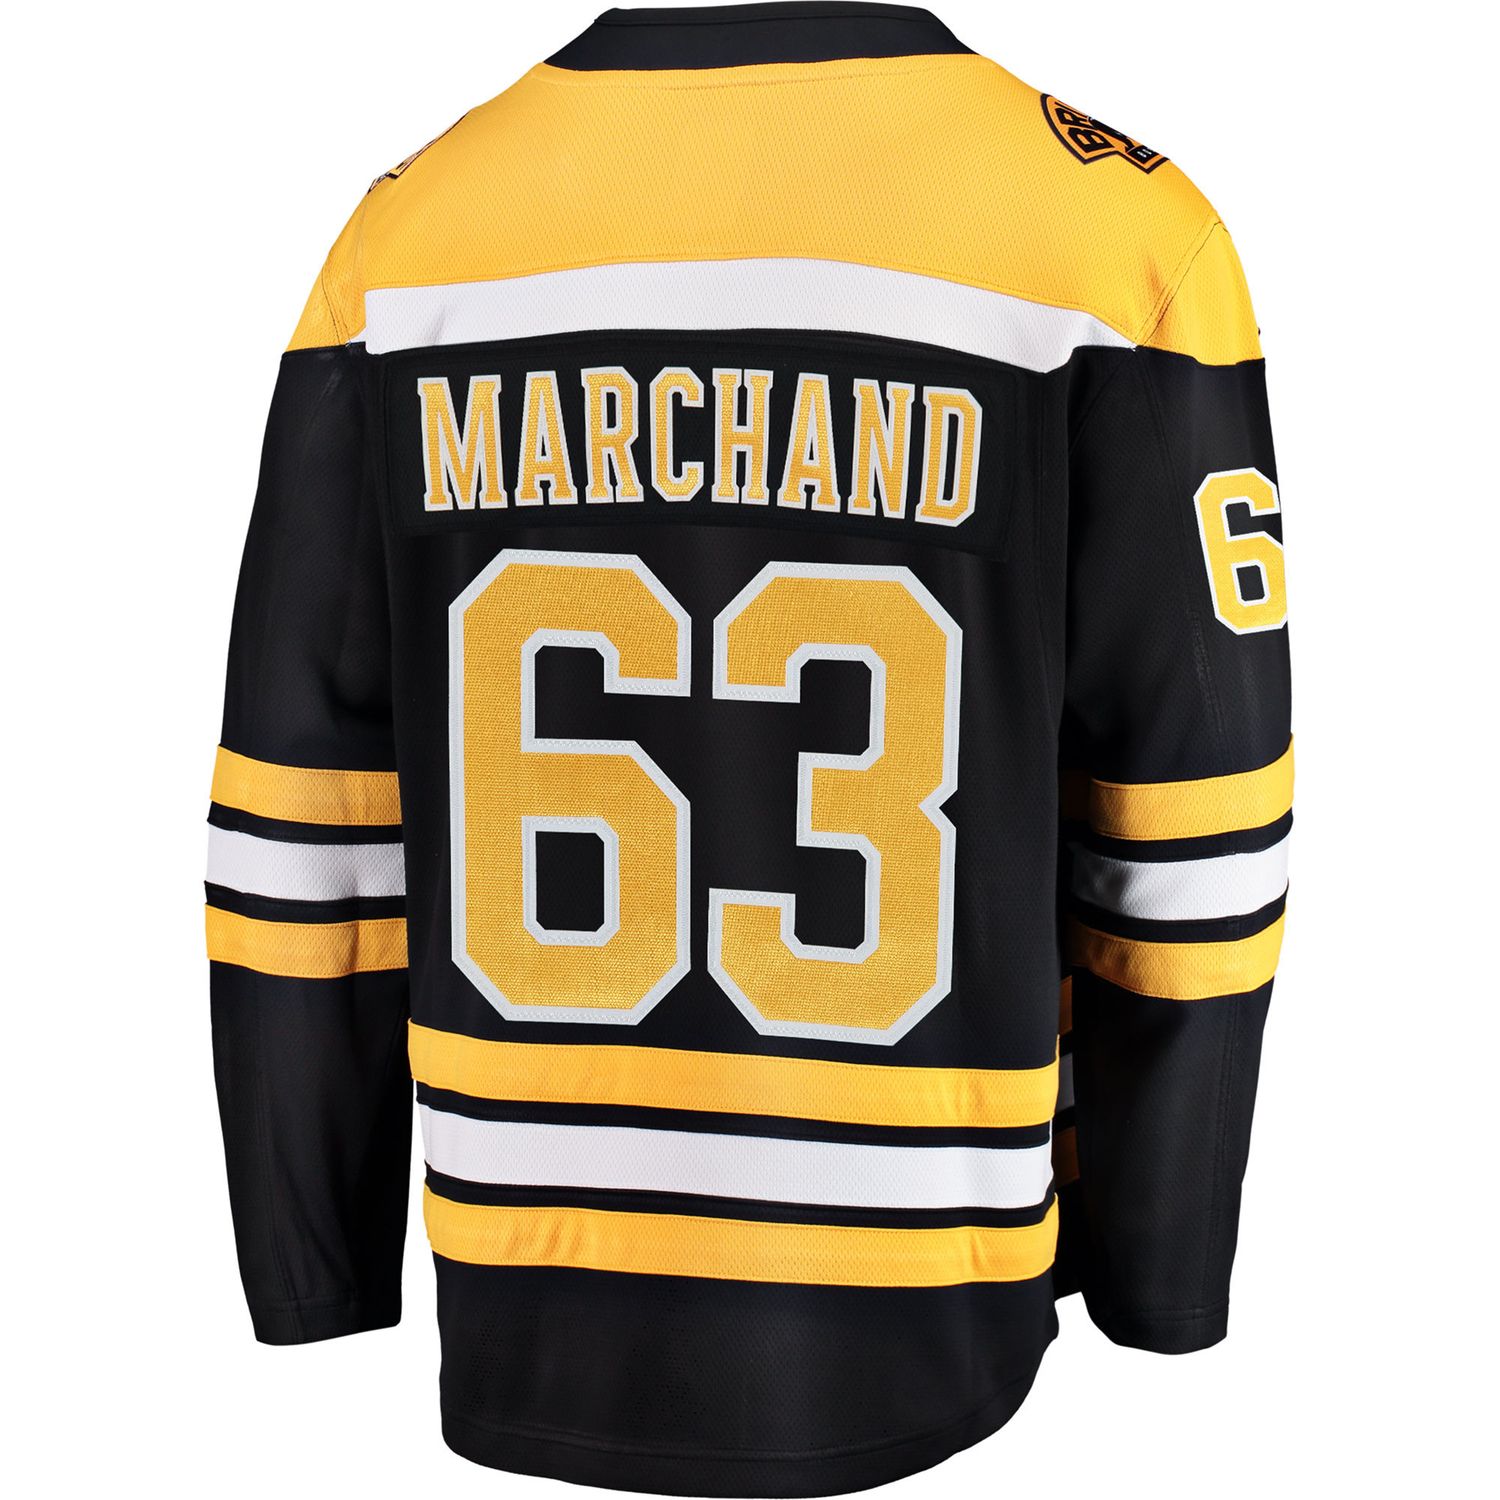 marchand jersey